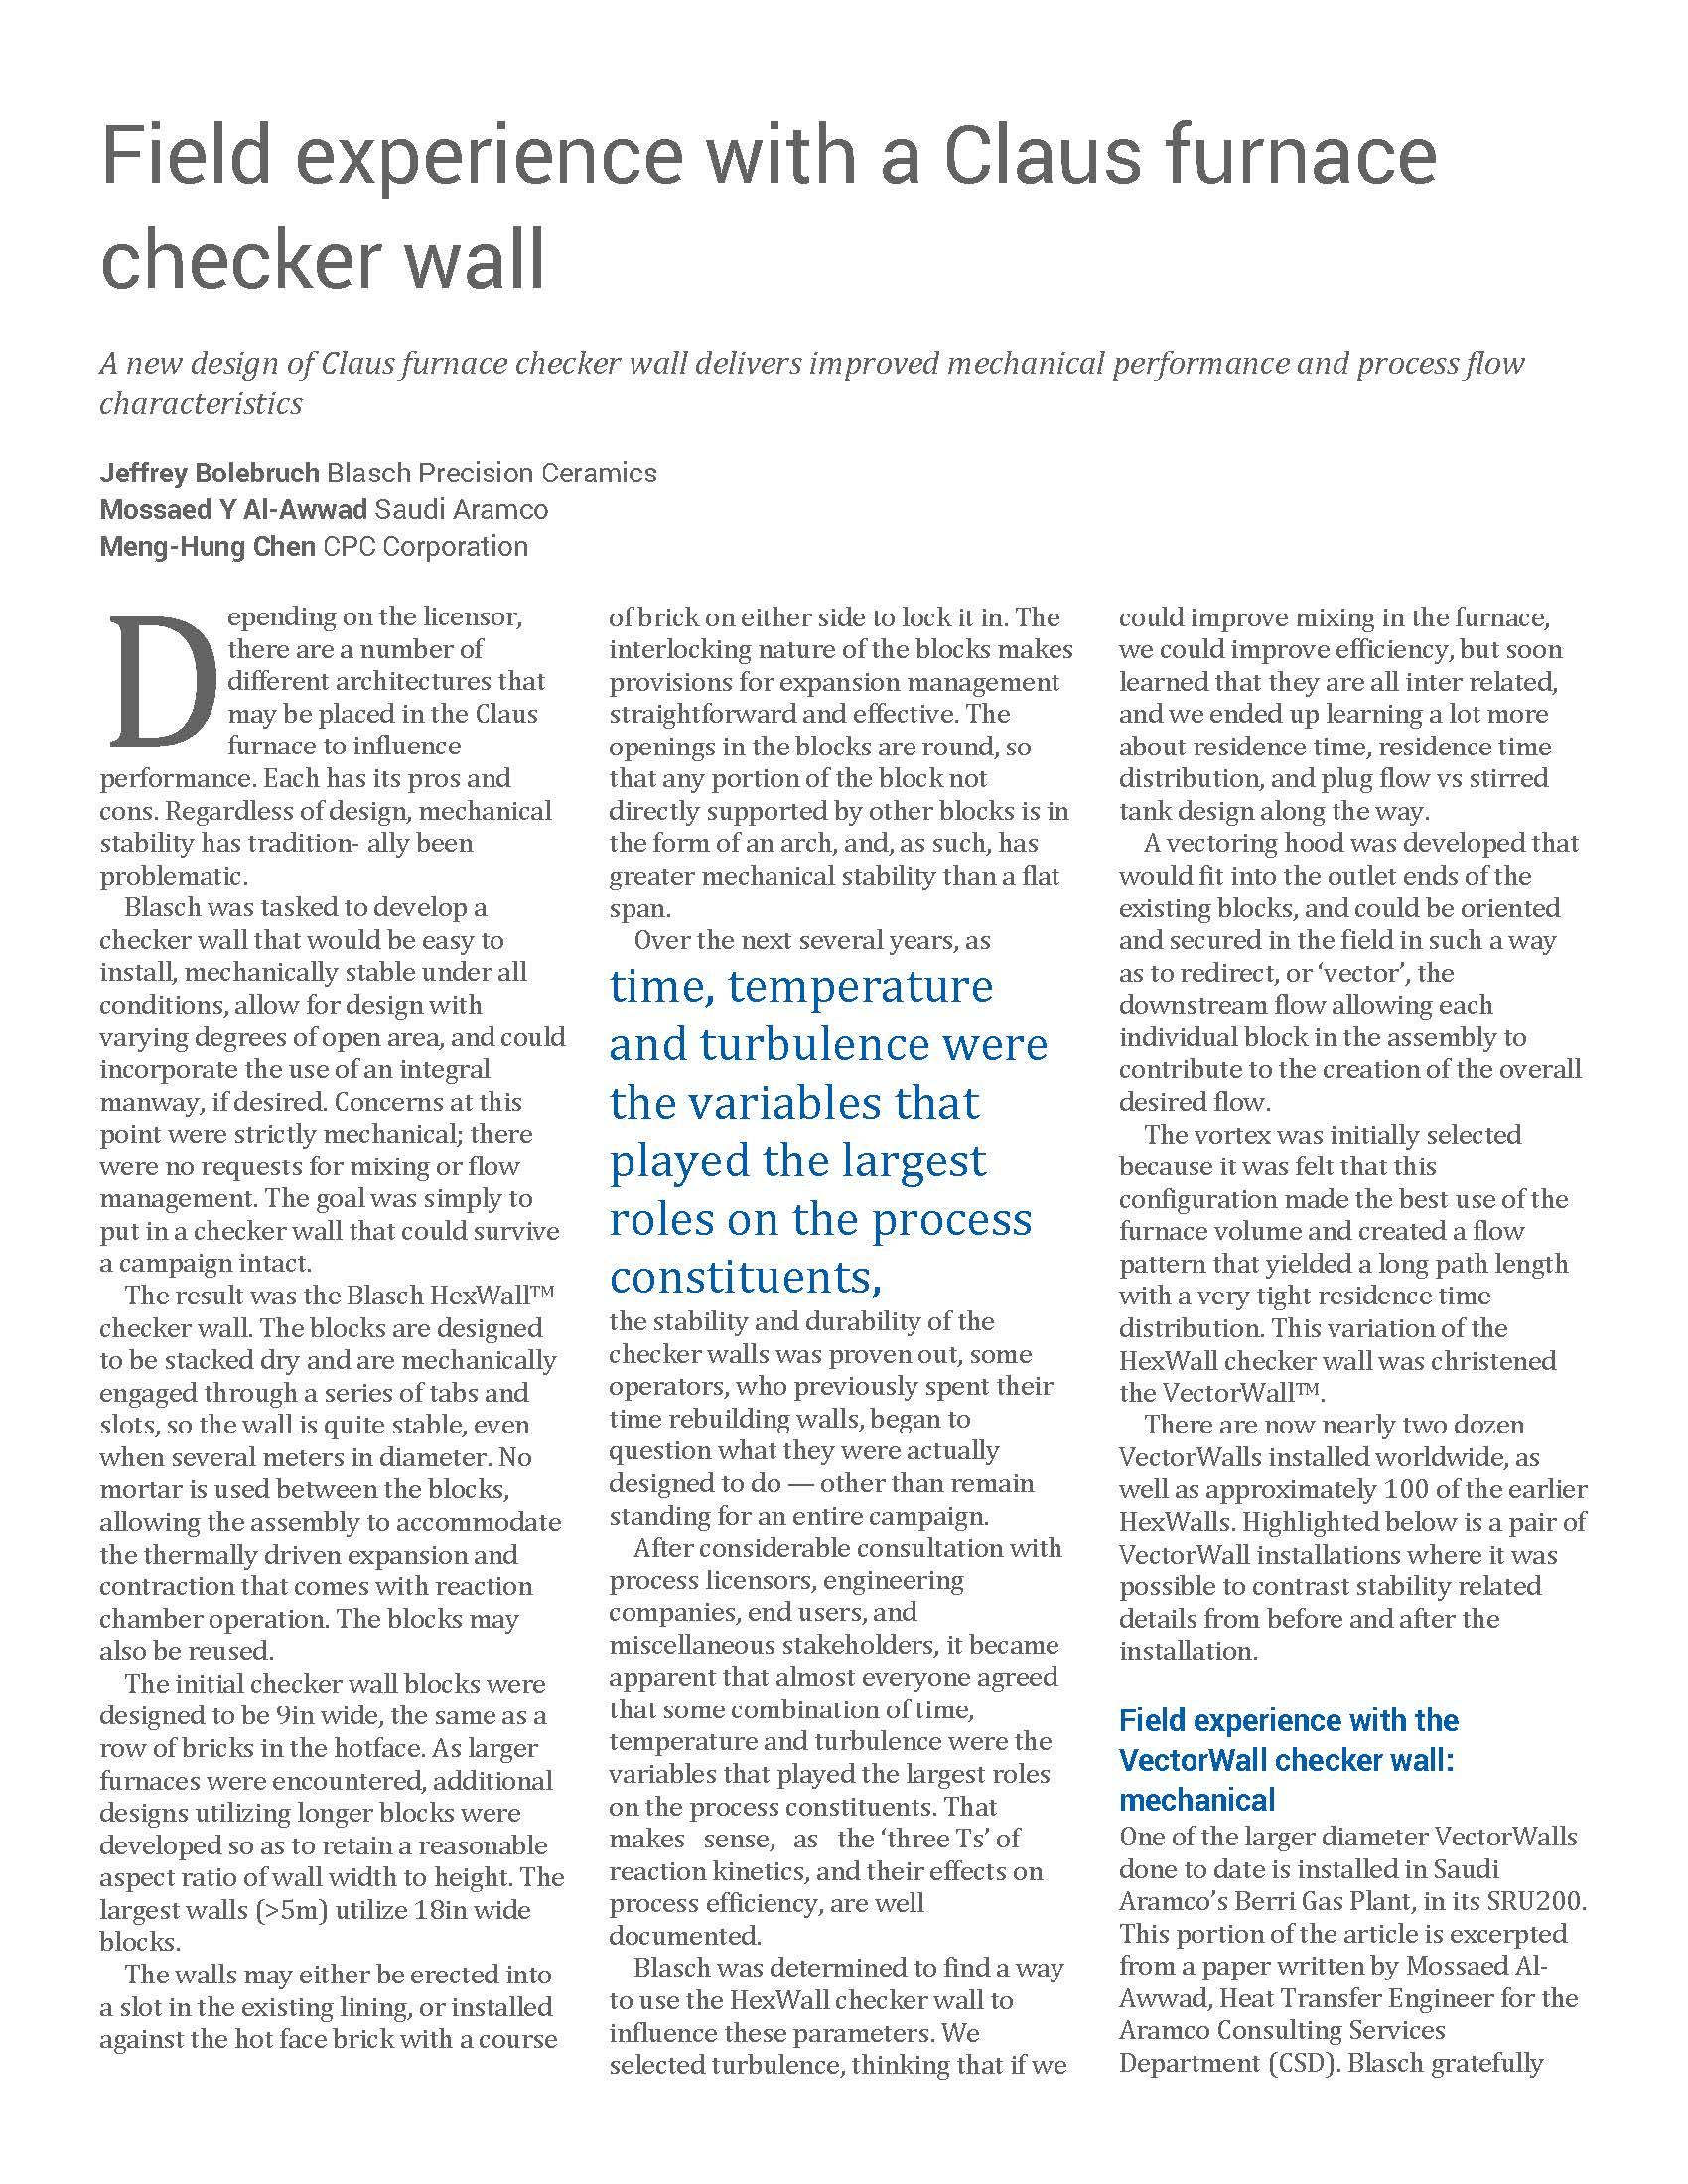 First page of "Field experience with a Claus furnace checker wall" white paper.